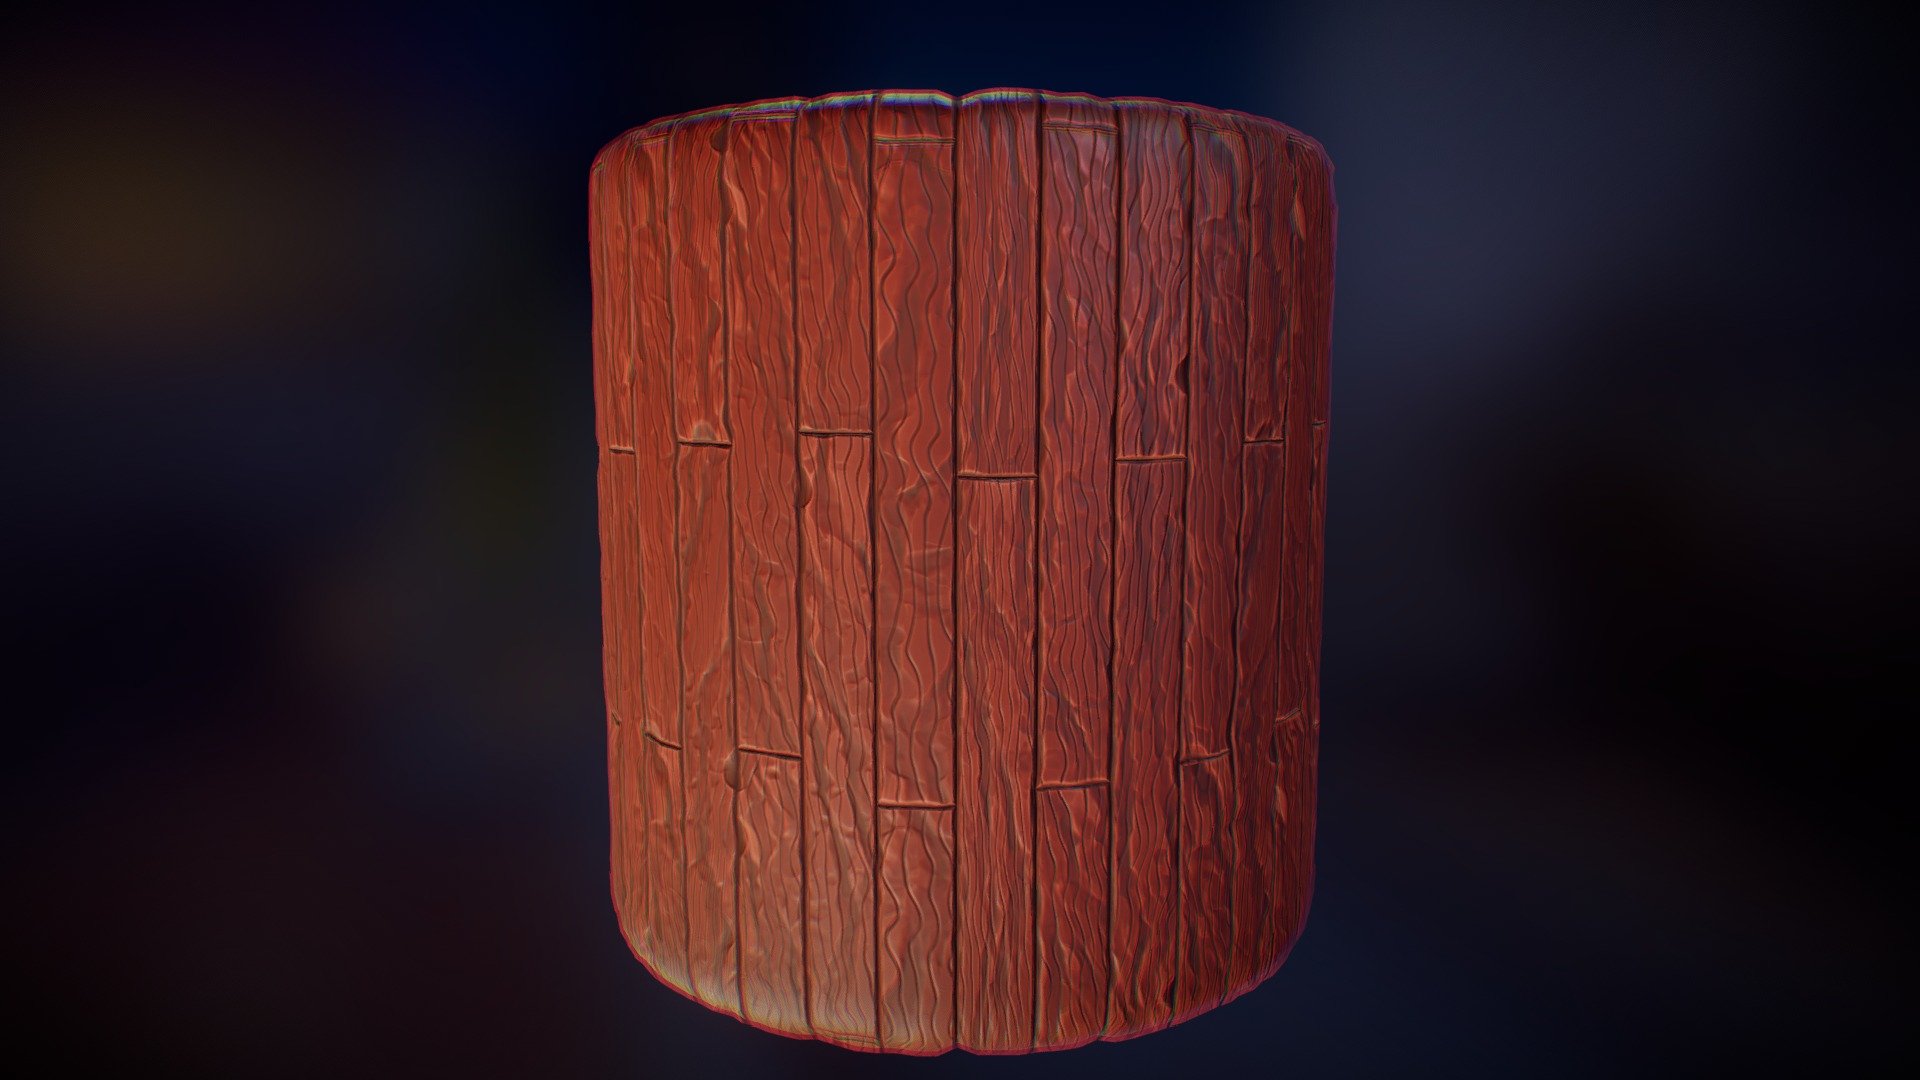 Stylized Wood, material made with Substance Designer.
Creation Timelapse available on Youtube

What you receive:
 Substance Designer Files. (.sbs and .sbsar) (2018.2.1 or highter) 
 PNG Textures. (1K, 2K, 4K) 
 Real-time video of the texture creation. (Video not narrated)

Modular, use this material for your games or other projects ! - Stylized Wood - Buy Royalty Free 3D model by NalouN 3d model